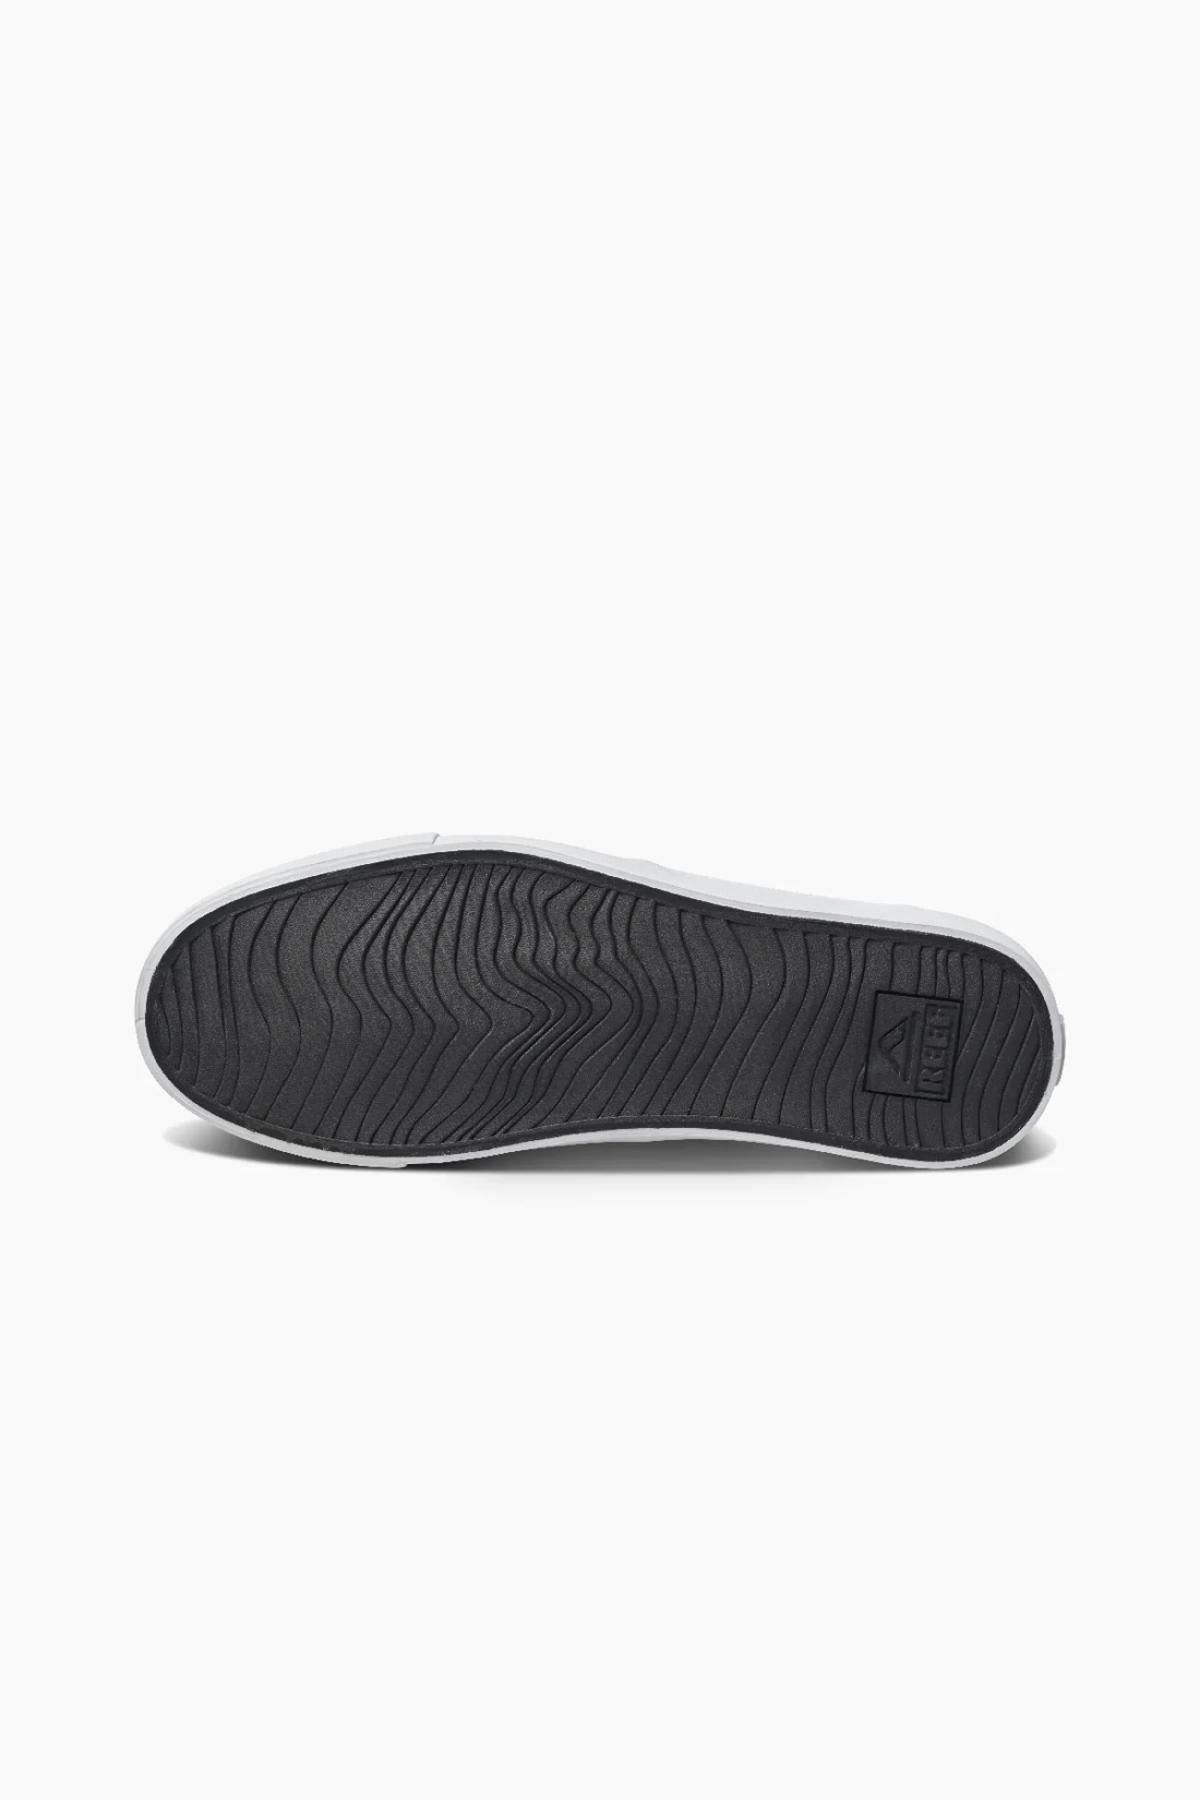 REEF Reef Deckhand 3 Black/White Men Casual Shoes